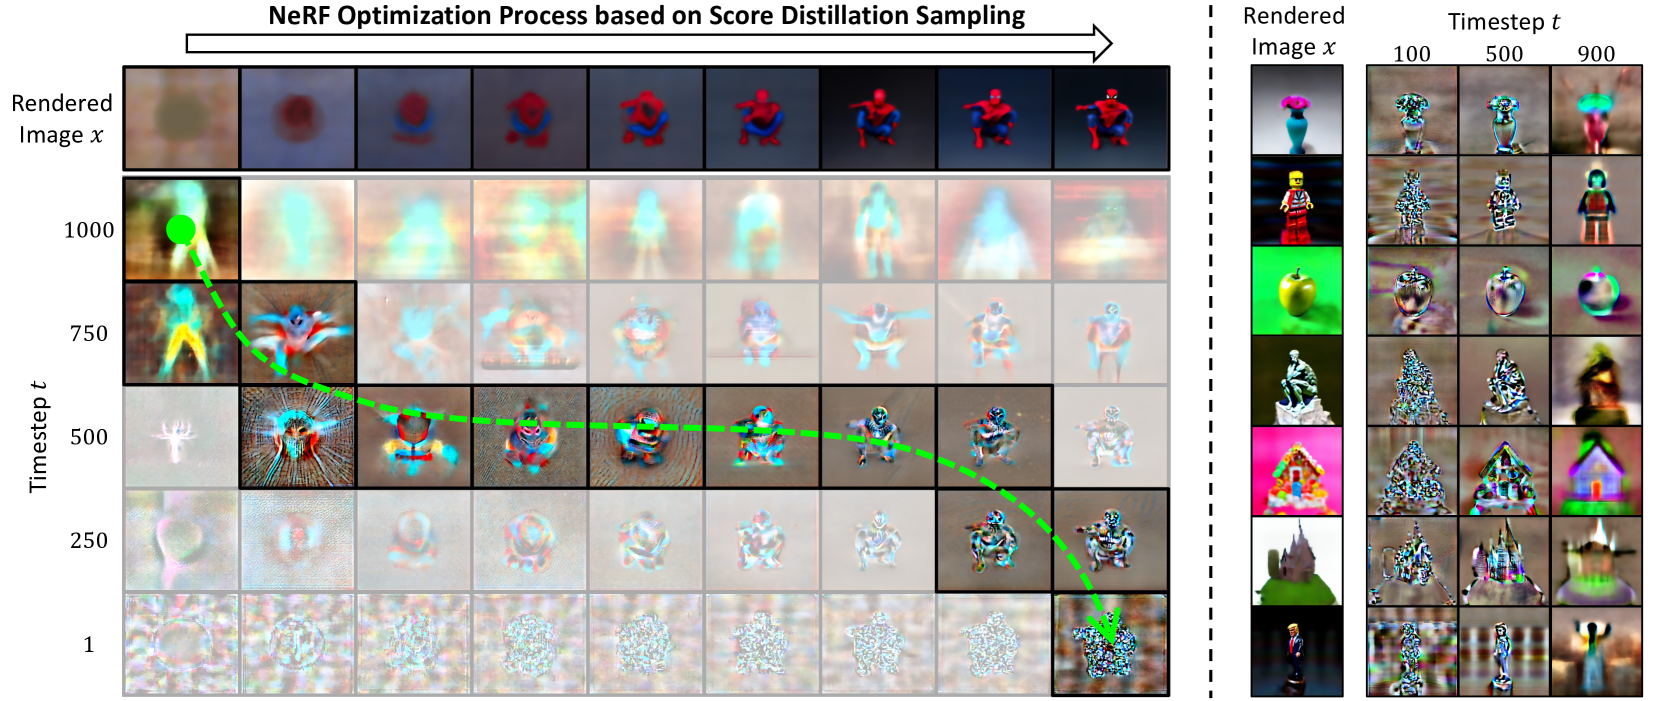 DreamTime: An Improved Optimization Strategy for Diffusion-Guided 3D Generation